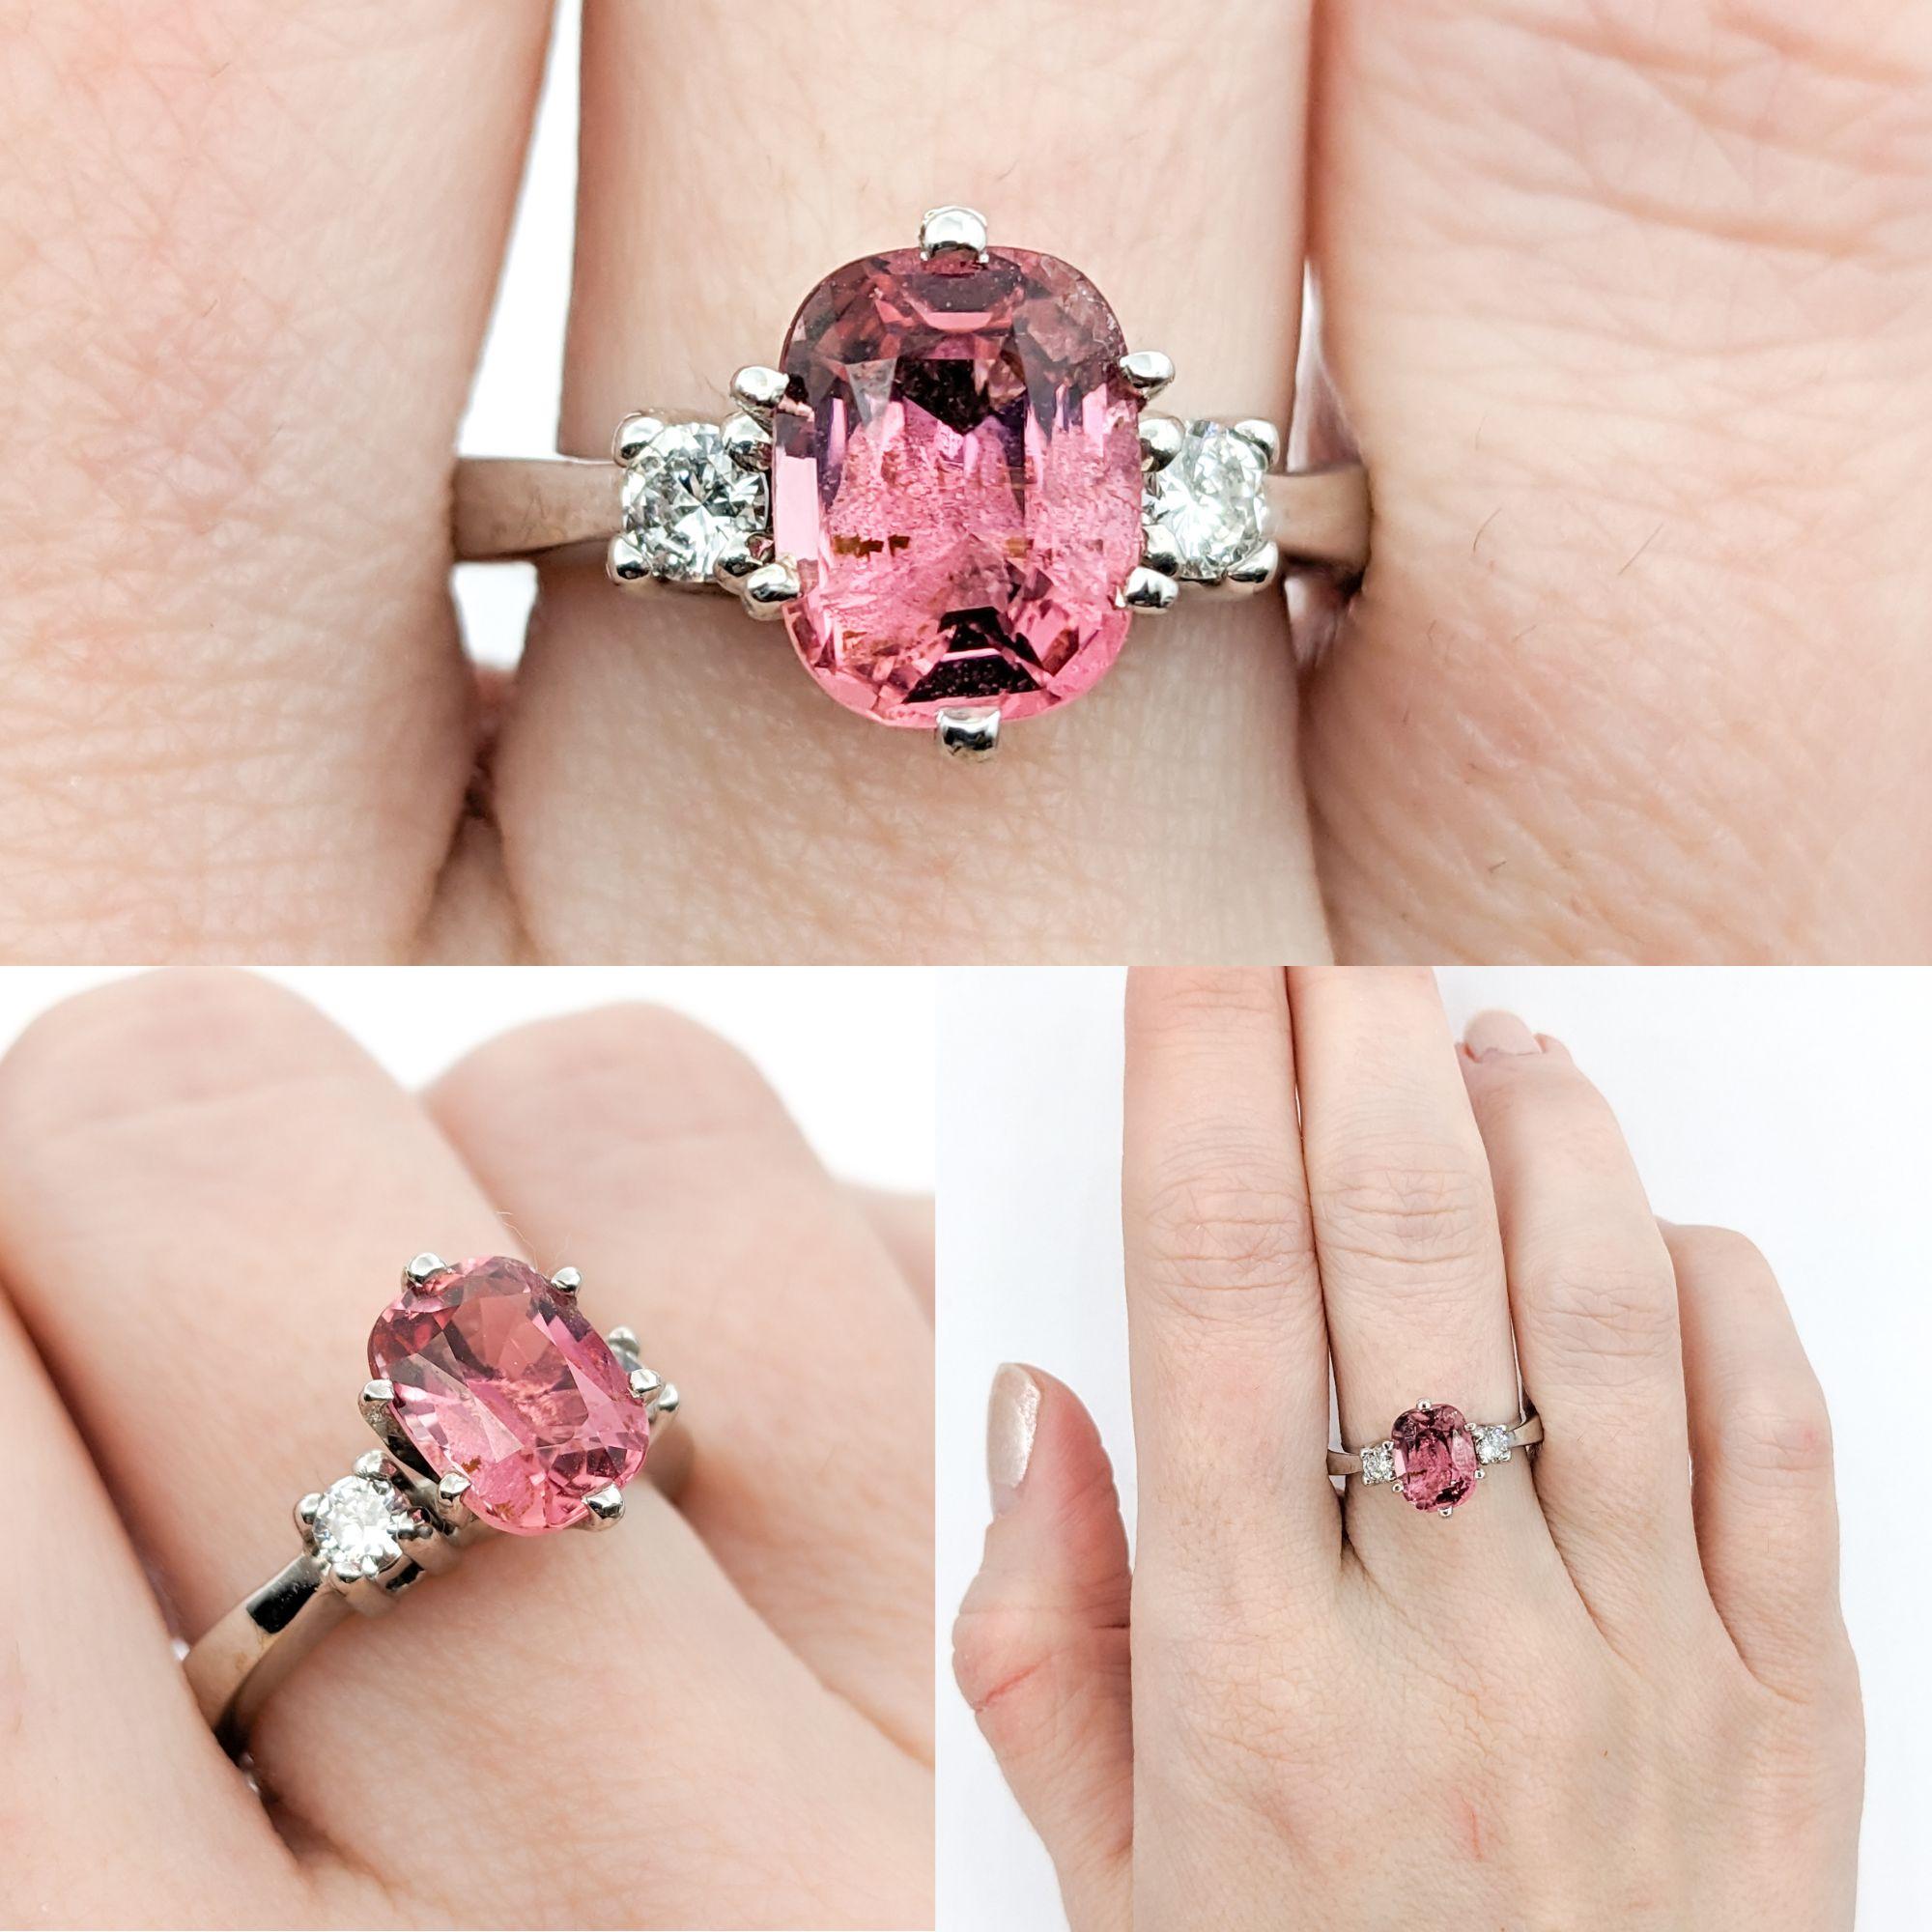 Pink Tourmaline & Diamond Dress Ring

This beautiful ring is crafted in 14kt white gold and features a 1.82ct cushion-cut pink tourmaline and .23ctw round brilliant-cut diamonds, SI2 clarity and G color. This ring is size 6 3/4 but can be adjusted